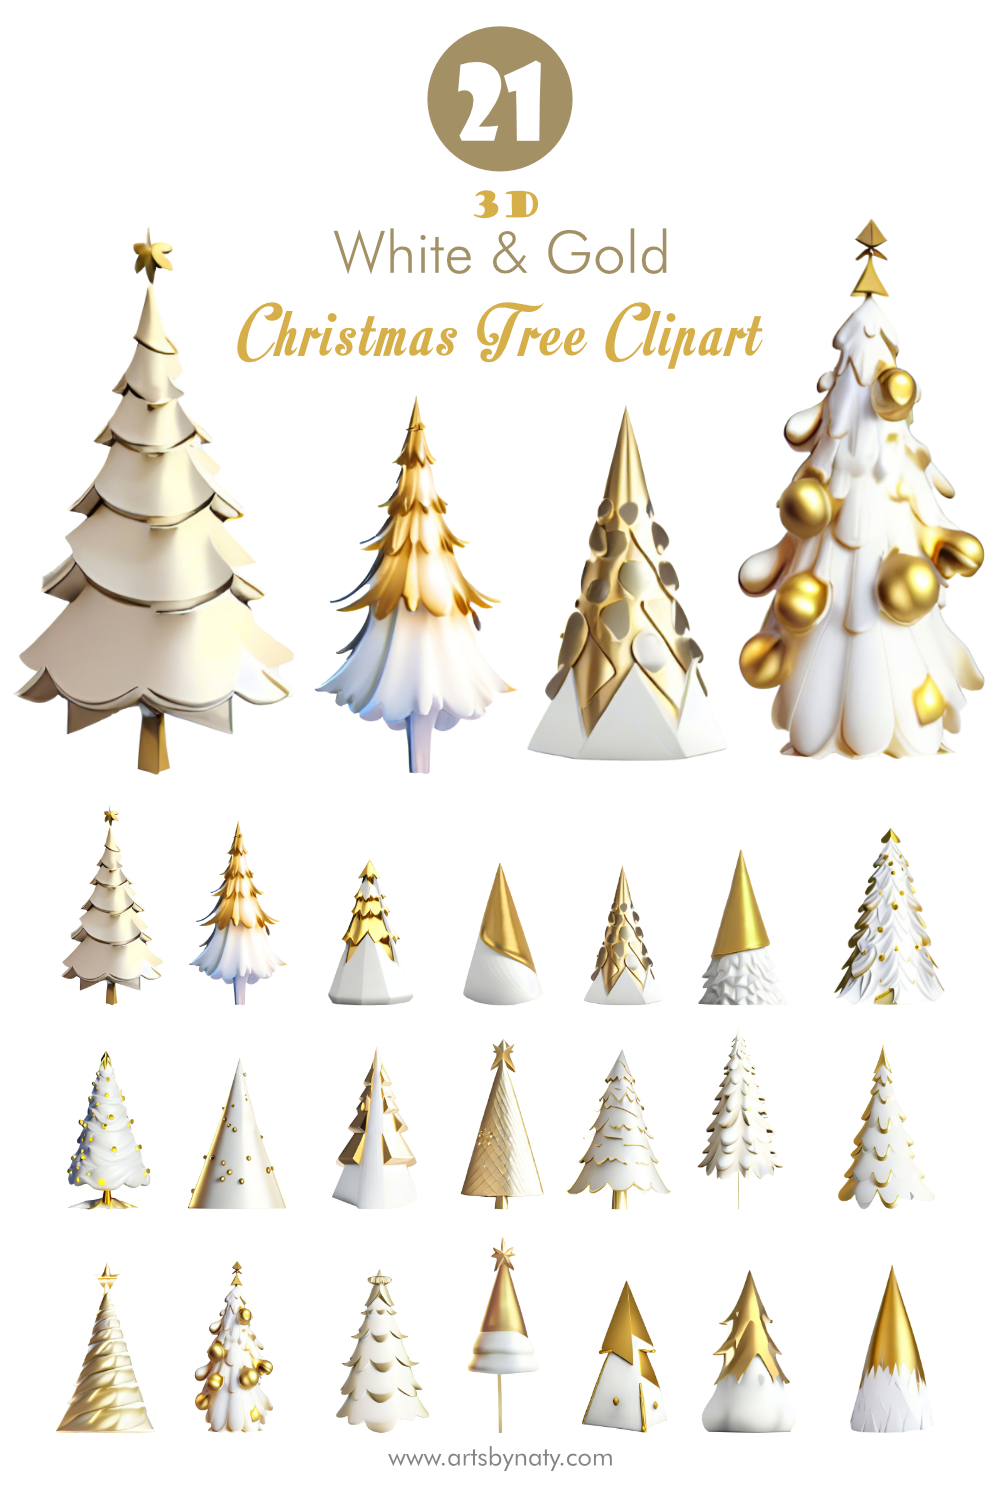 3D White and Gold Christmas Tree Clipart Bundle pinterest image.